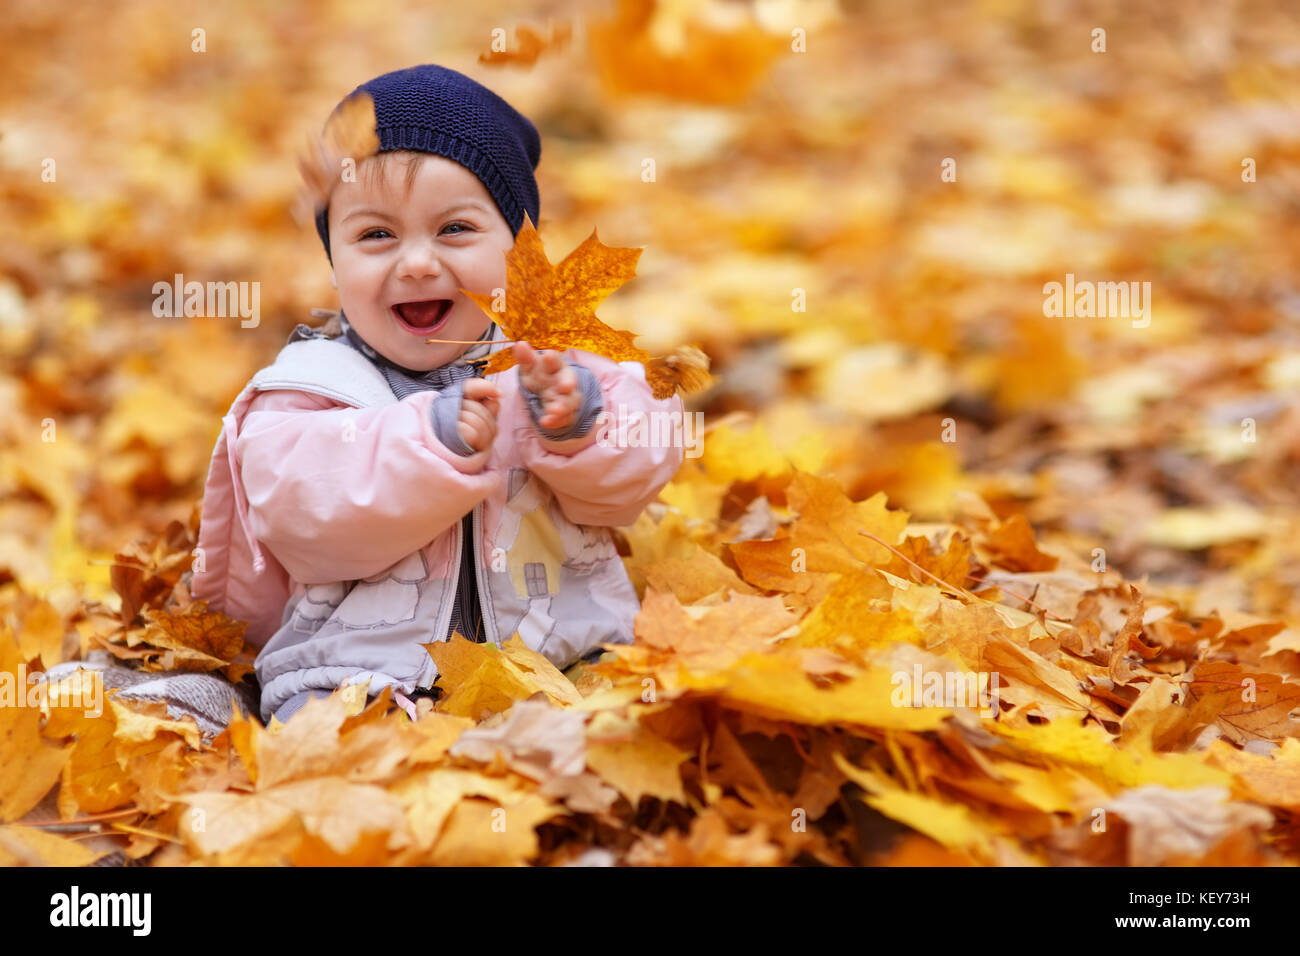 baby girl laughing and playing with golden leaves Stock Photo